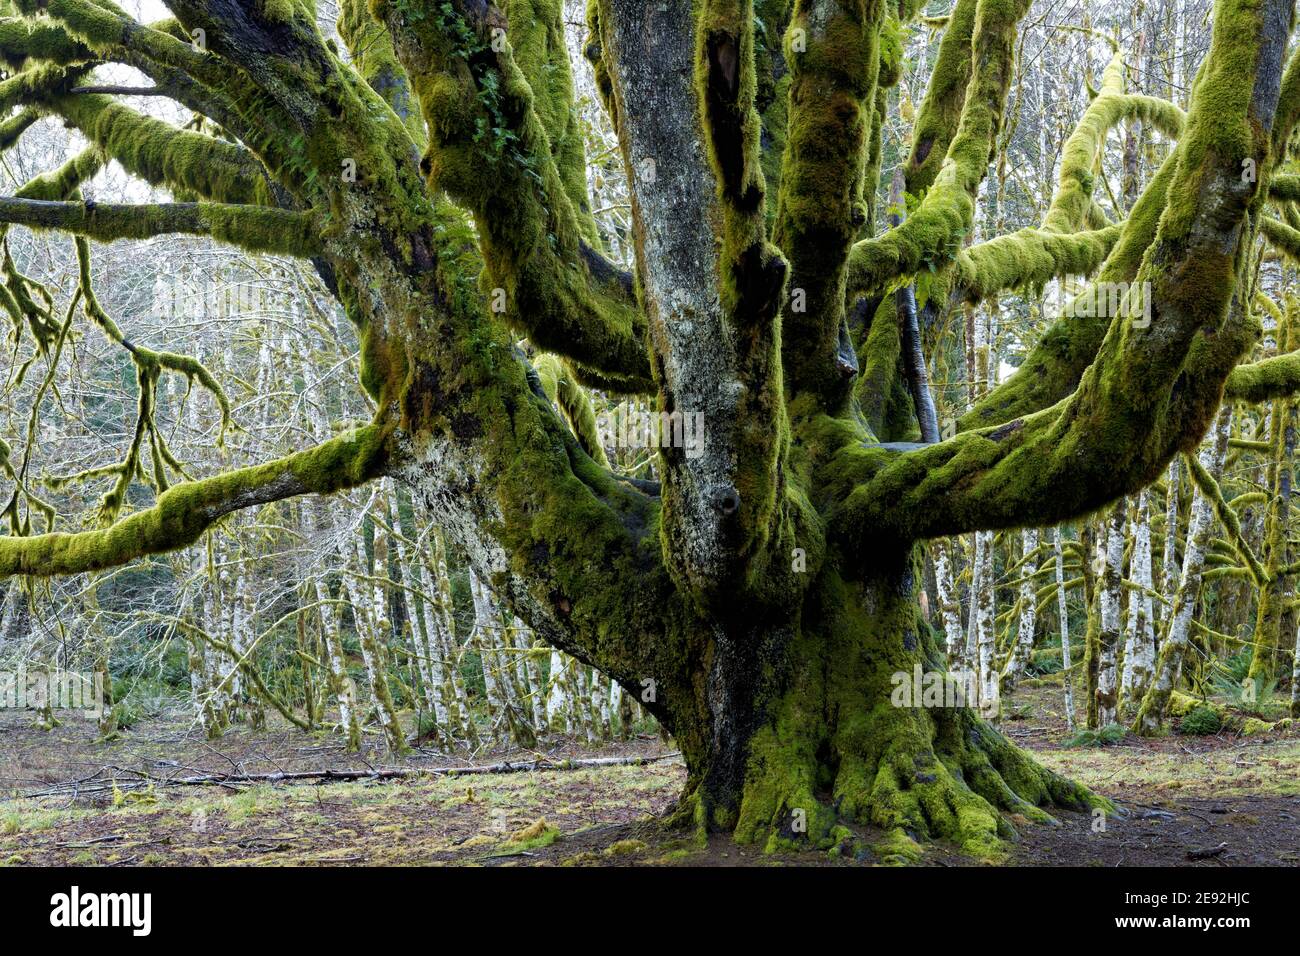 Trunk and lower branches of large big leaf maple tree, with forest of red alder trees in background, Fairholme Campground, Olympic National Park, Jeff Stock Photo